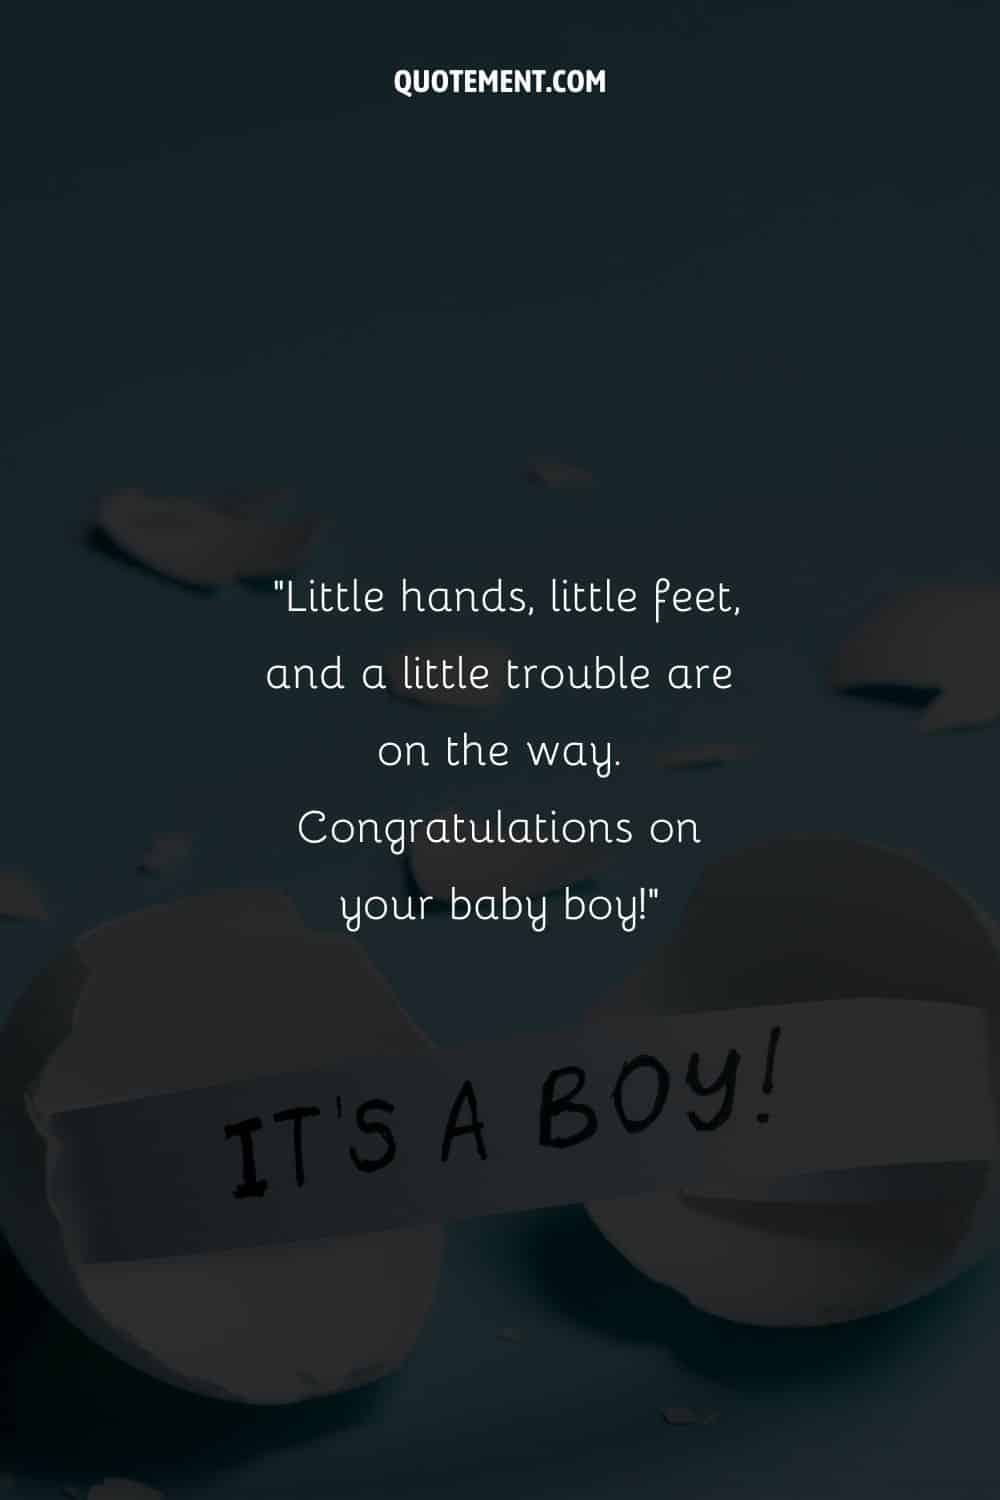 Little hands, little feet, and a little trouble are on the way. Congratulations on your baby boy